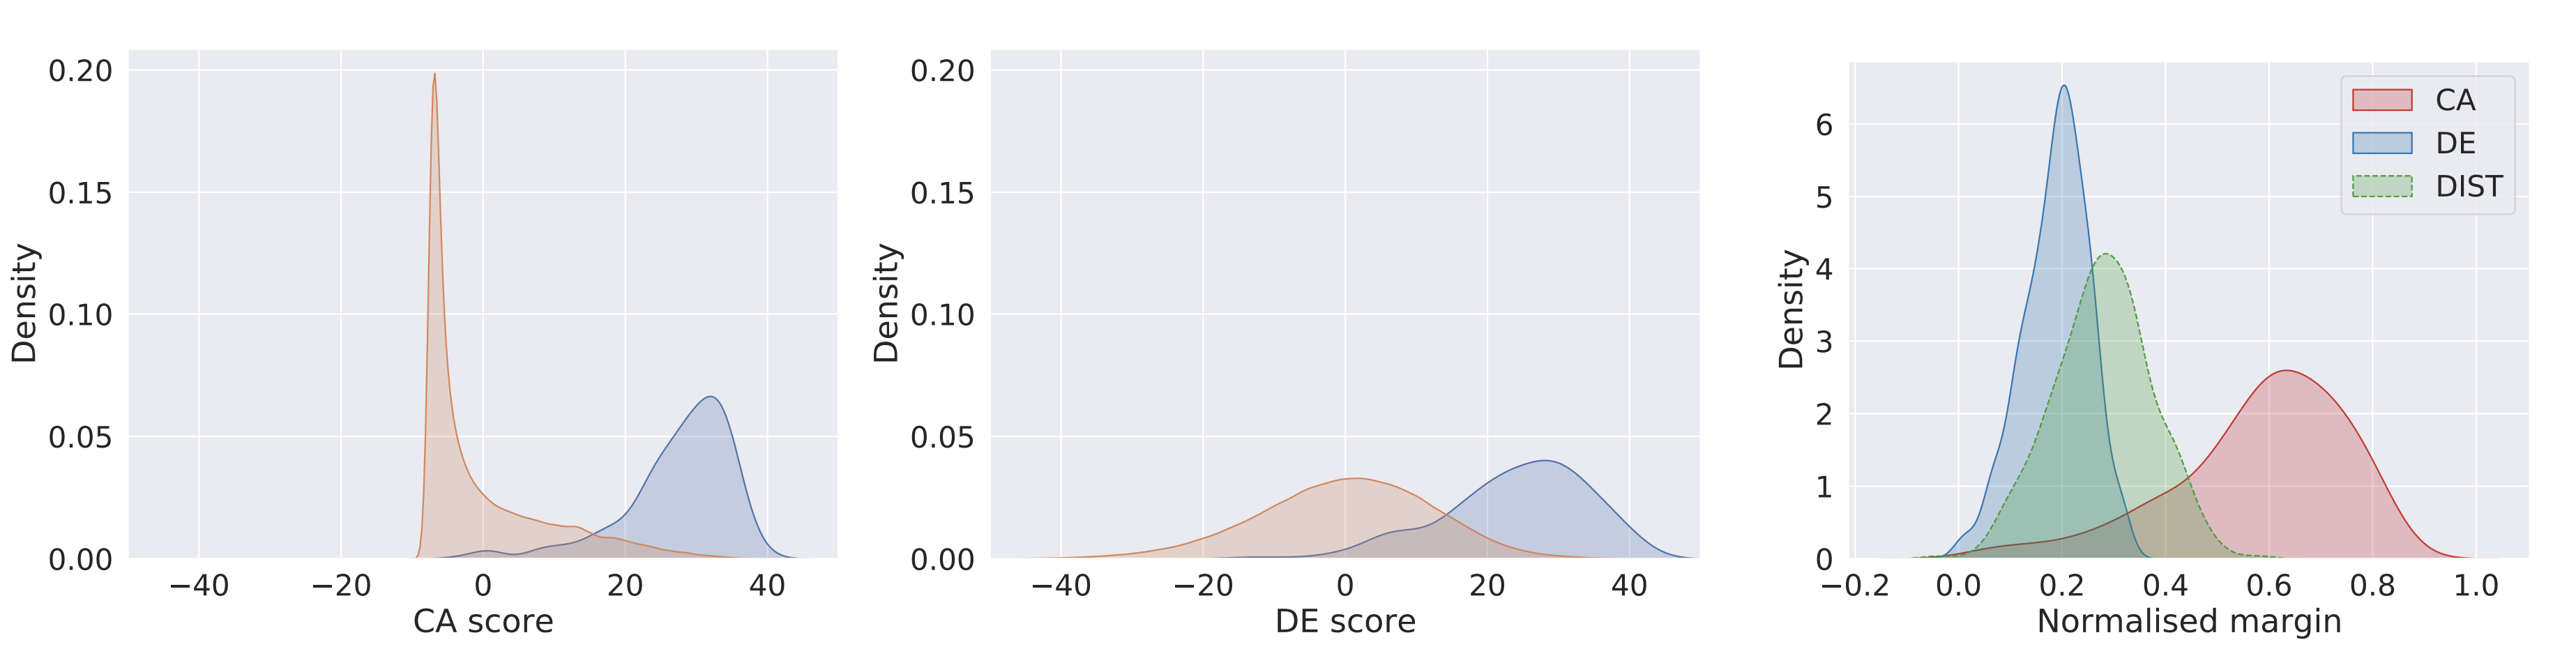 CA models have better separation between positive and negative examples, strongly predicting negative examples. DE models have more overlap between positive and negative predictions. Normalizing the margins between positive and negative predictions (higher is better), CA models clearly have better performance. The distilled model is slightly better than the DE model.